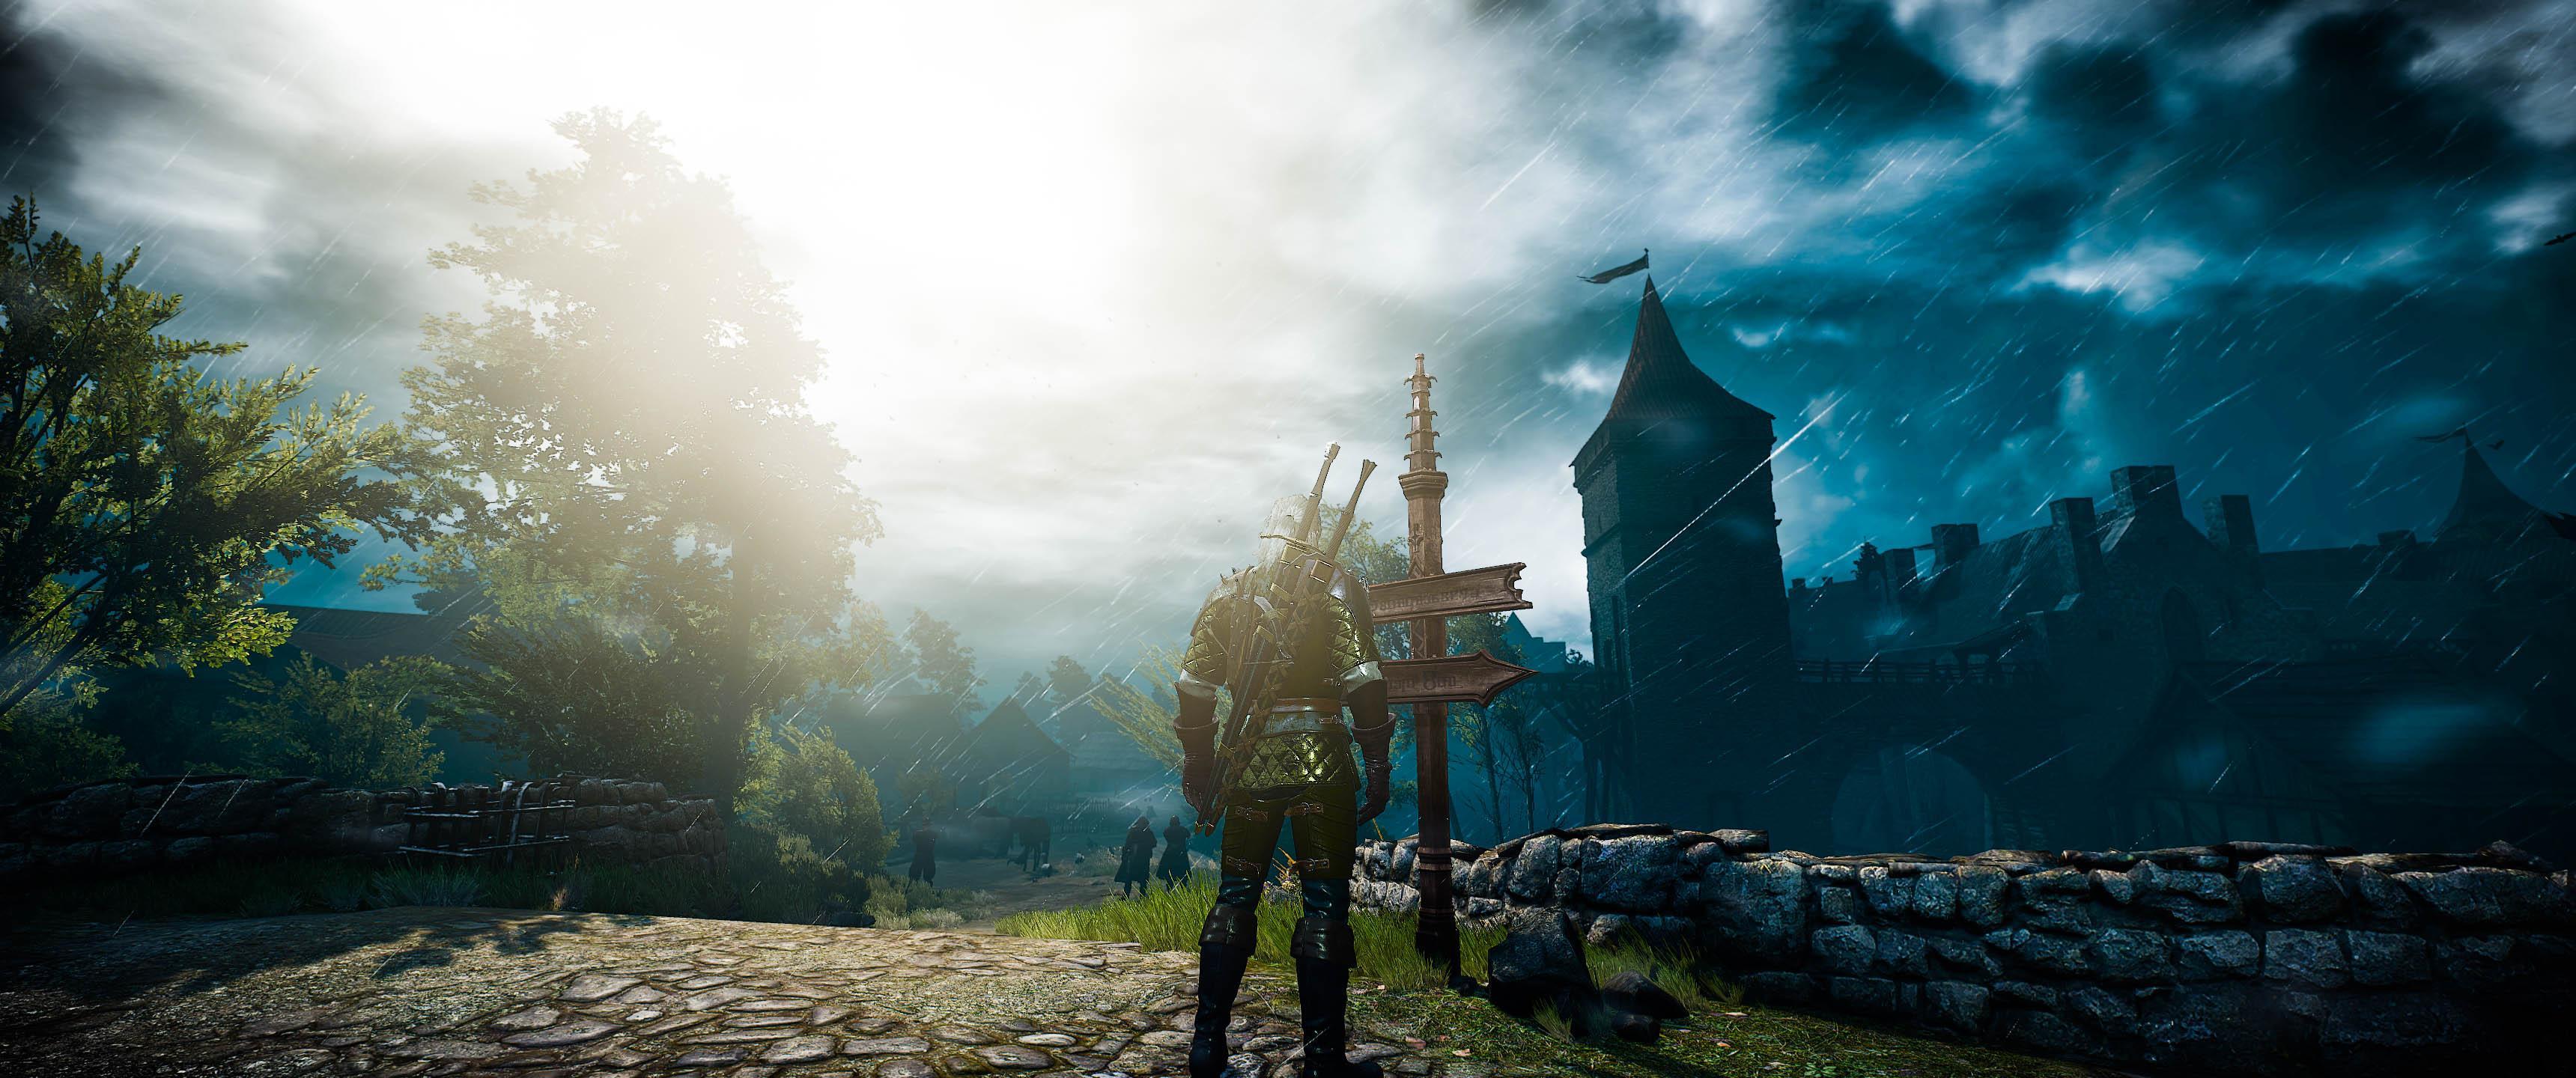 3440x1440p The Witcher 3 Images